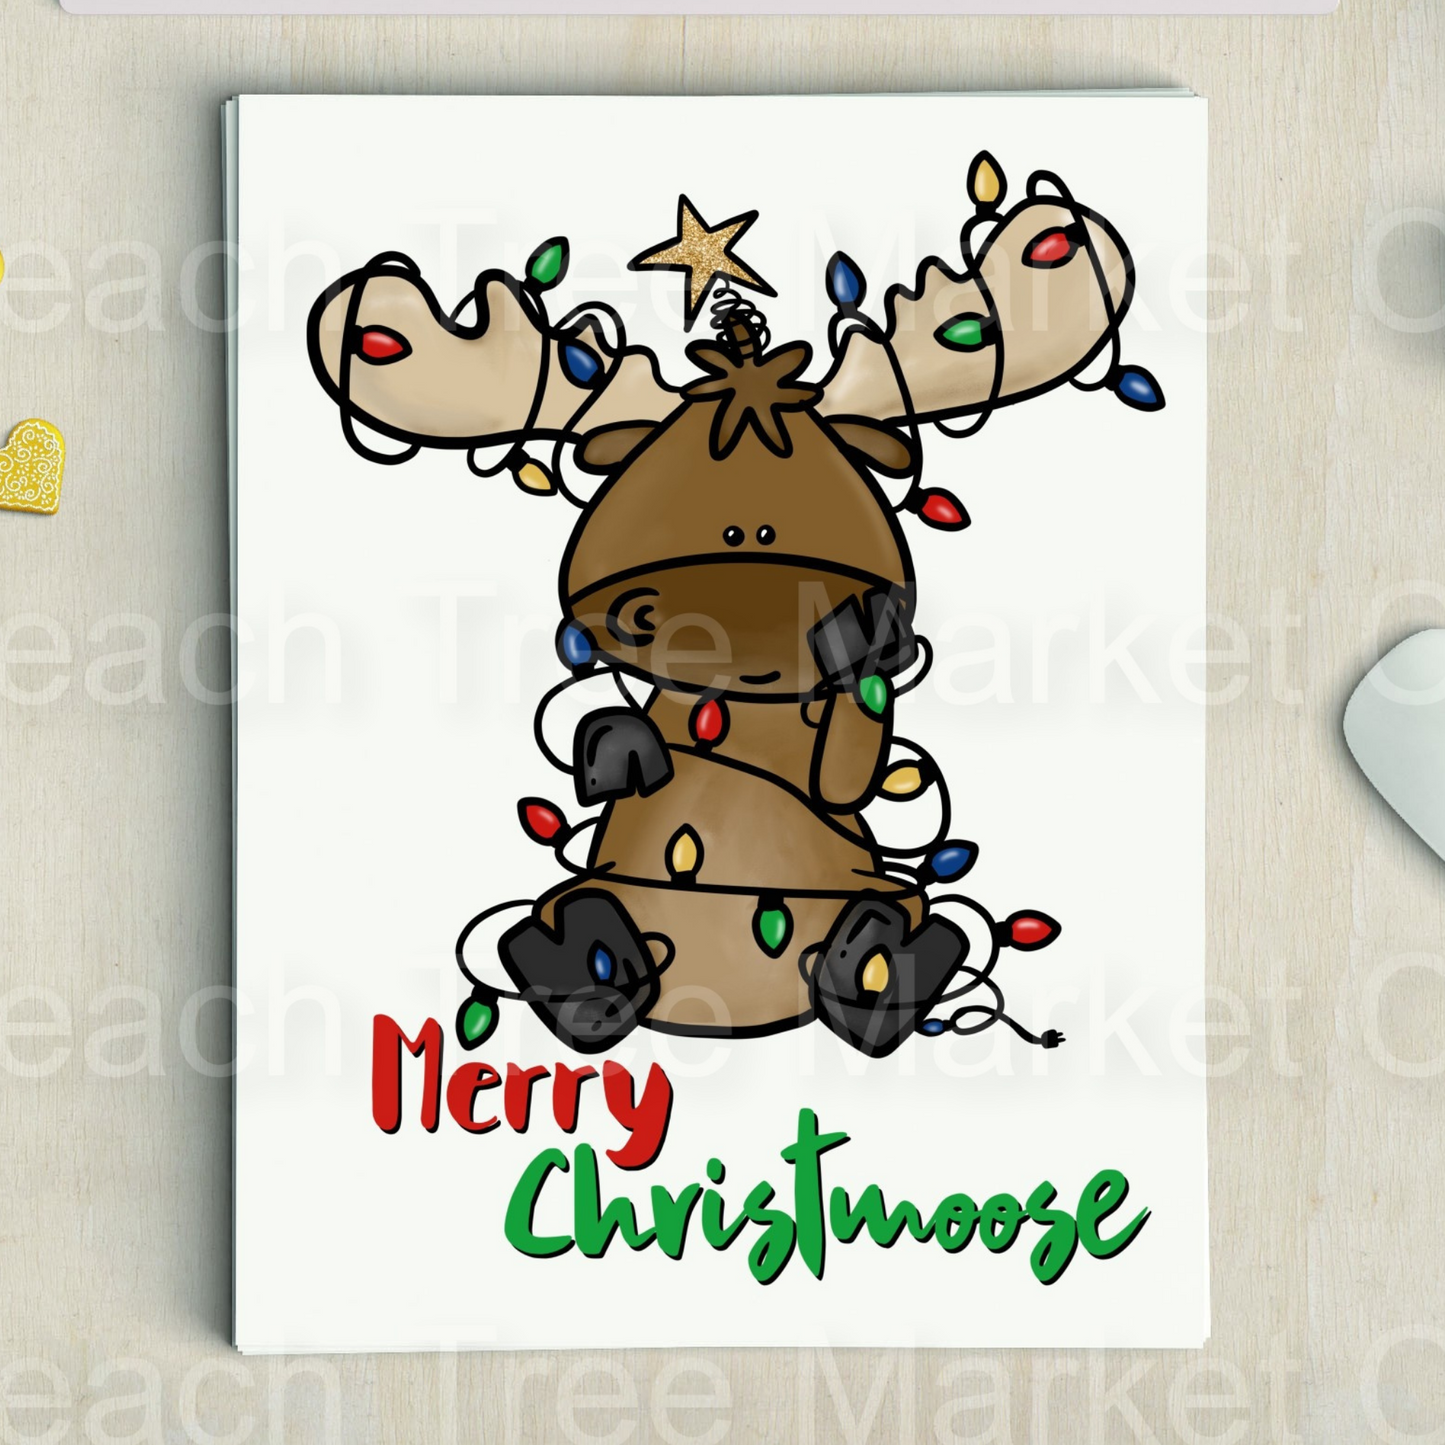 Merry Christmoose Holiday Christmas Ready To Press Sublimation Transfers Draft